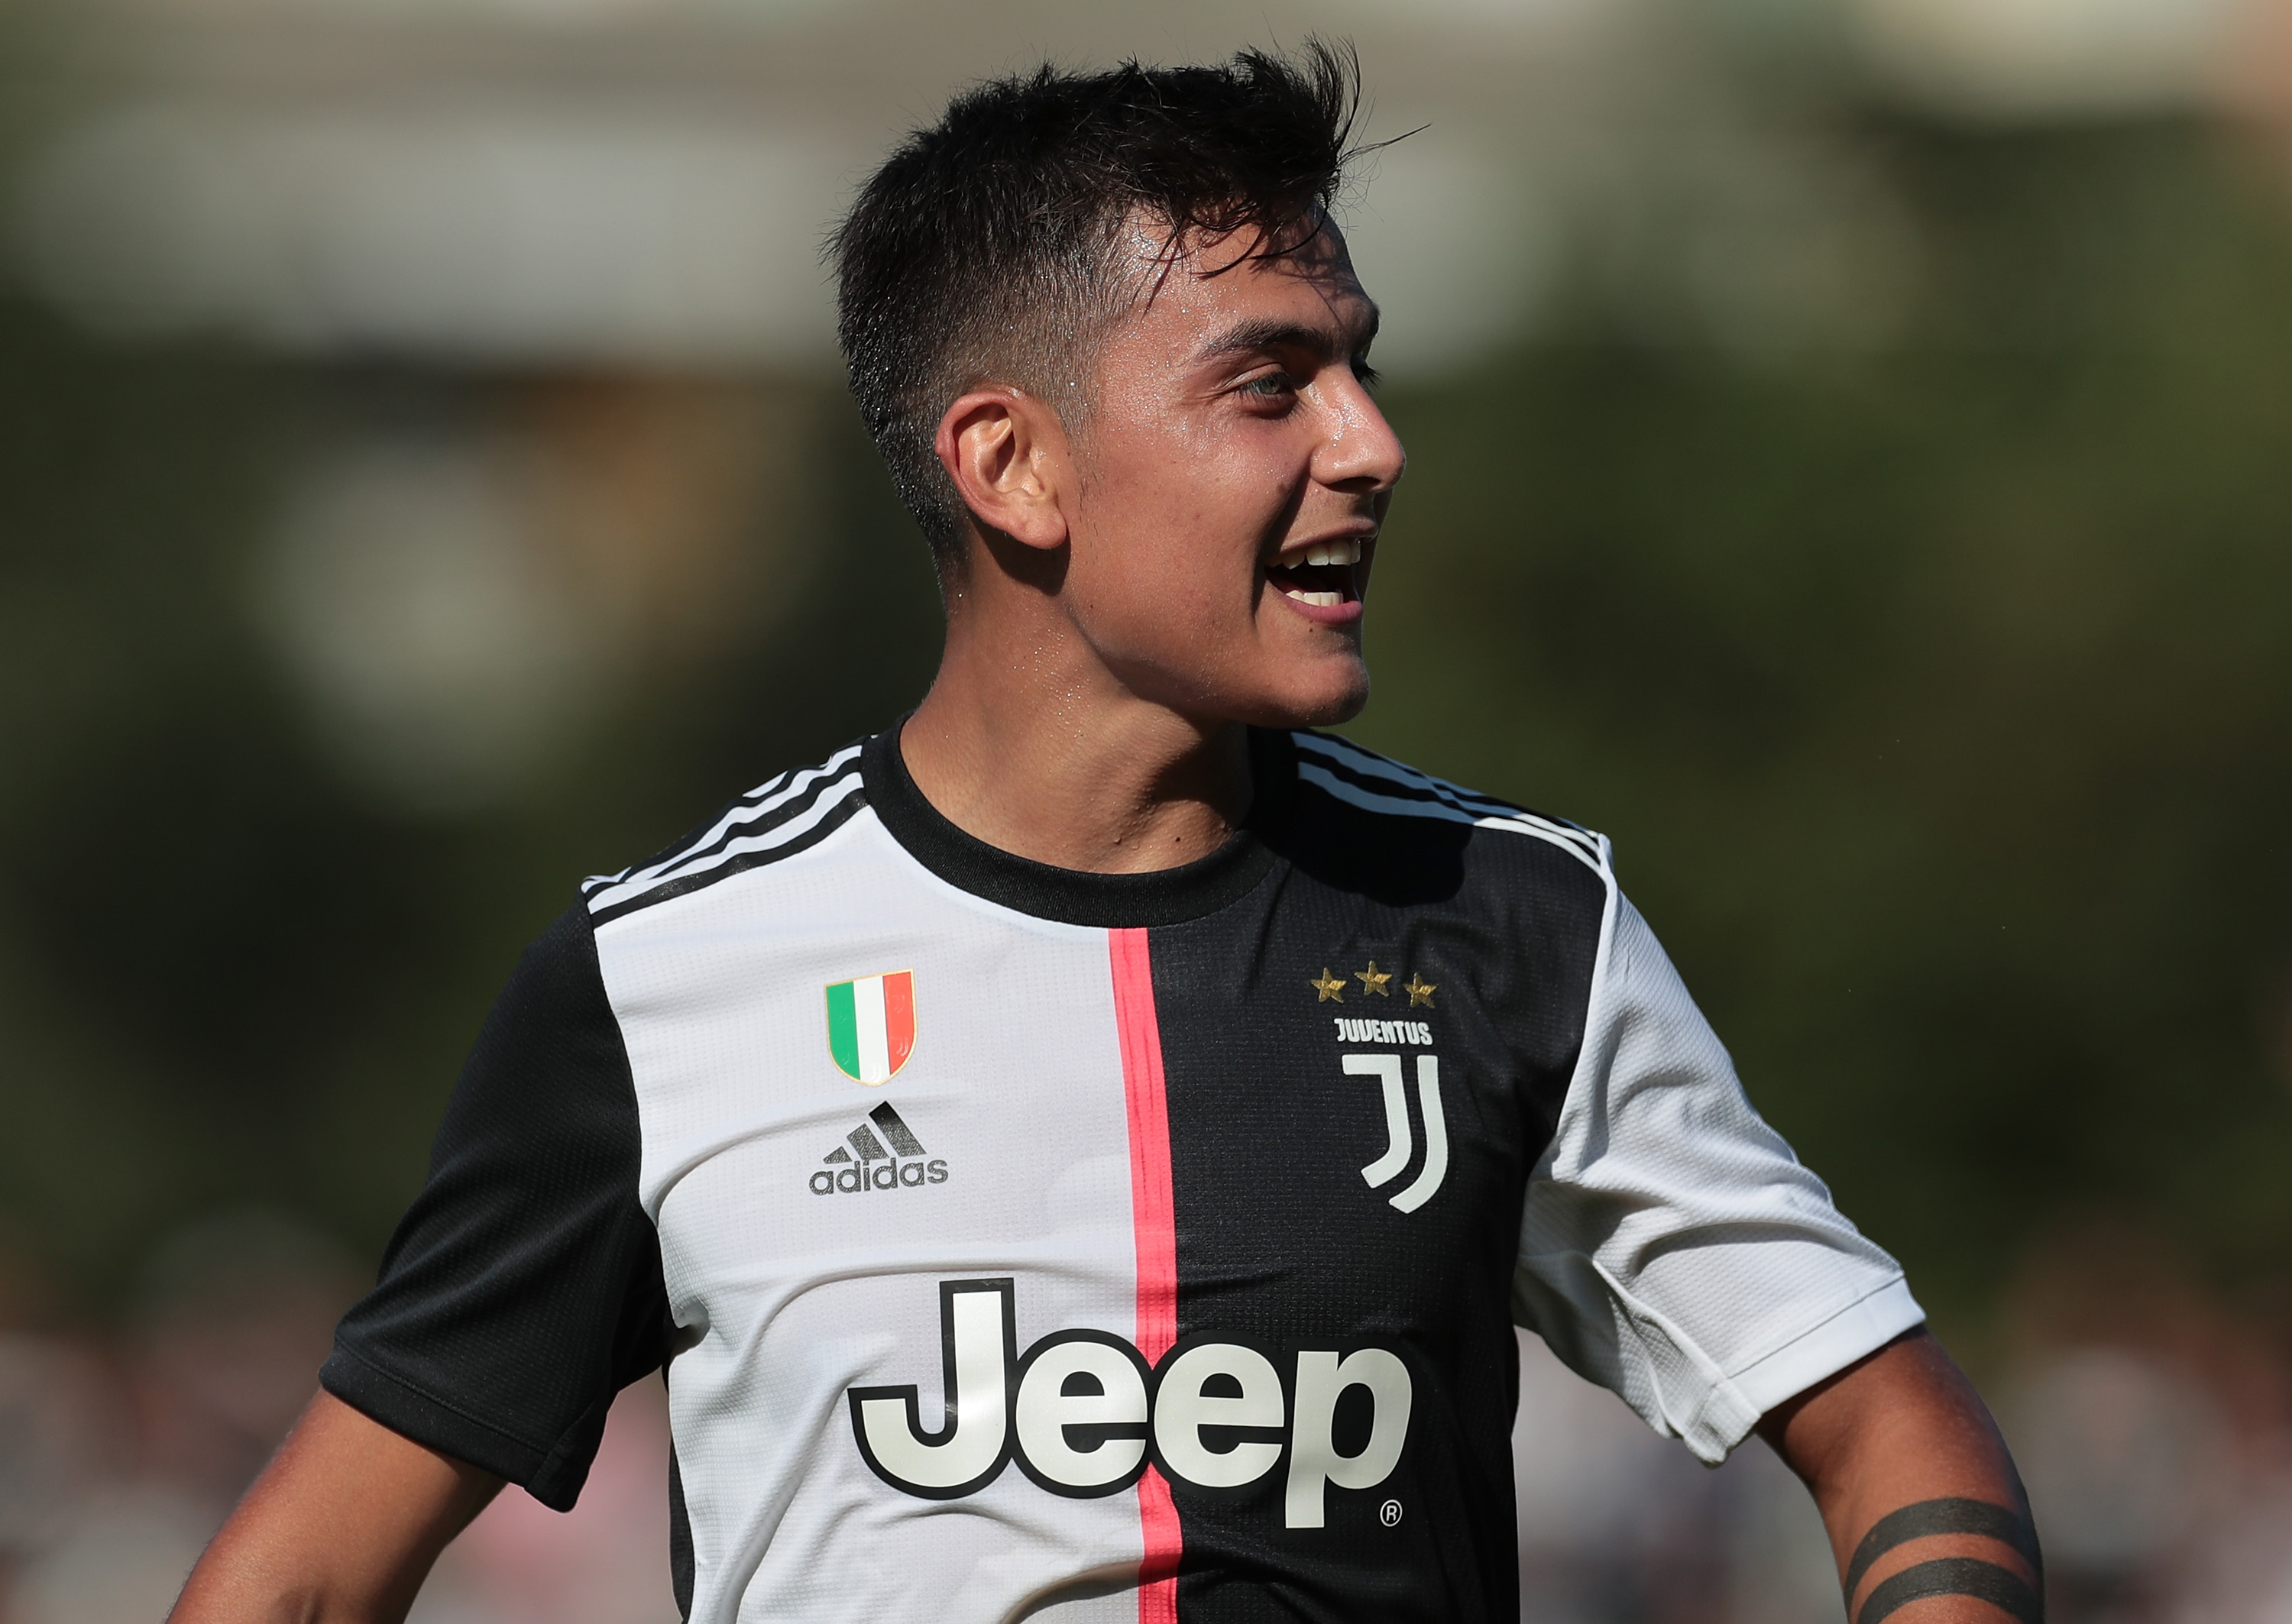 Will Dybala grab his Juventus lifeline? (Photo by Emilio Andreoli/Getty Images)